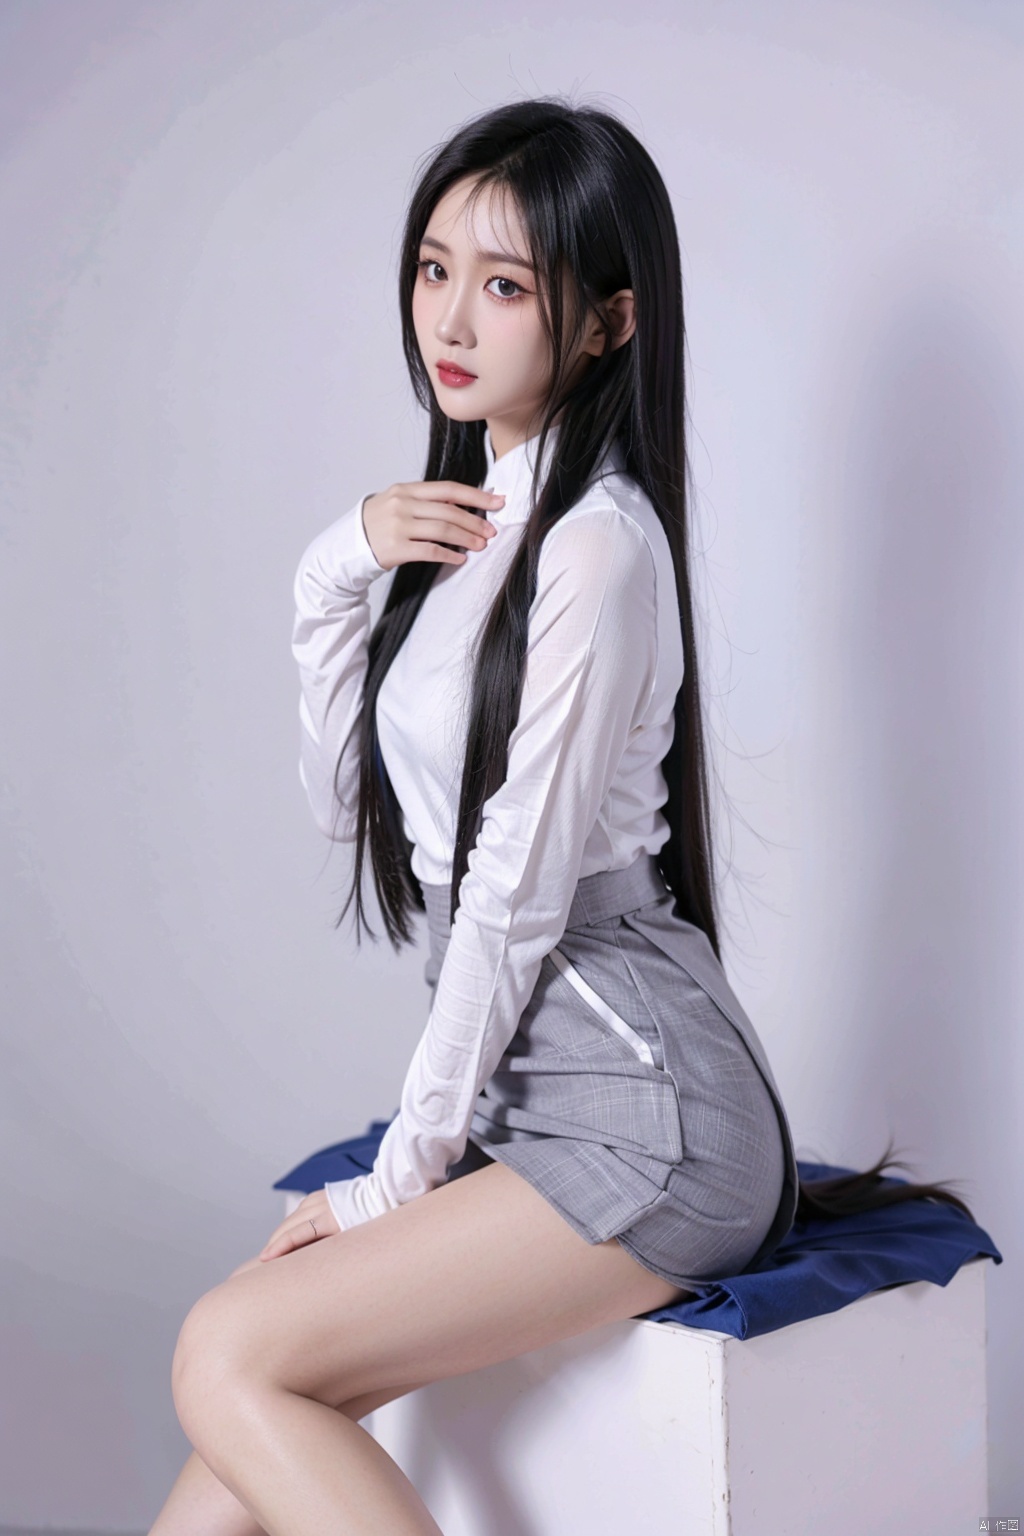 chinese_clothes, skirt, pures Grey Background, Magzine style, chinese_text,school_woman,MIX4